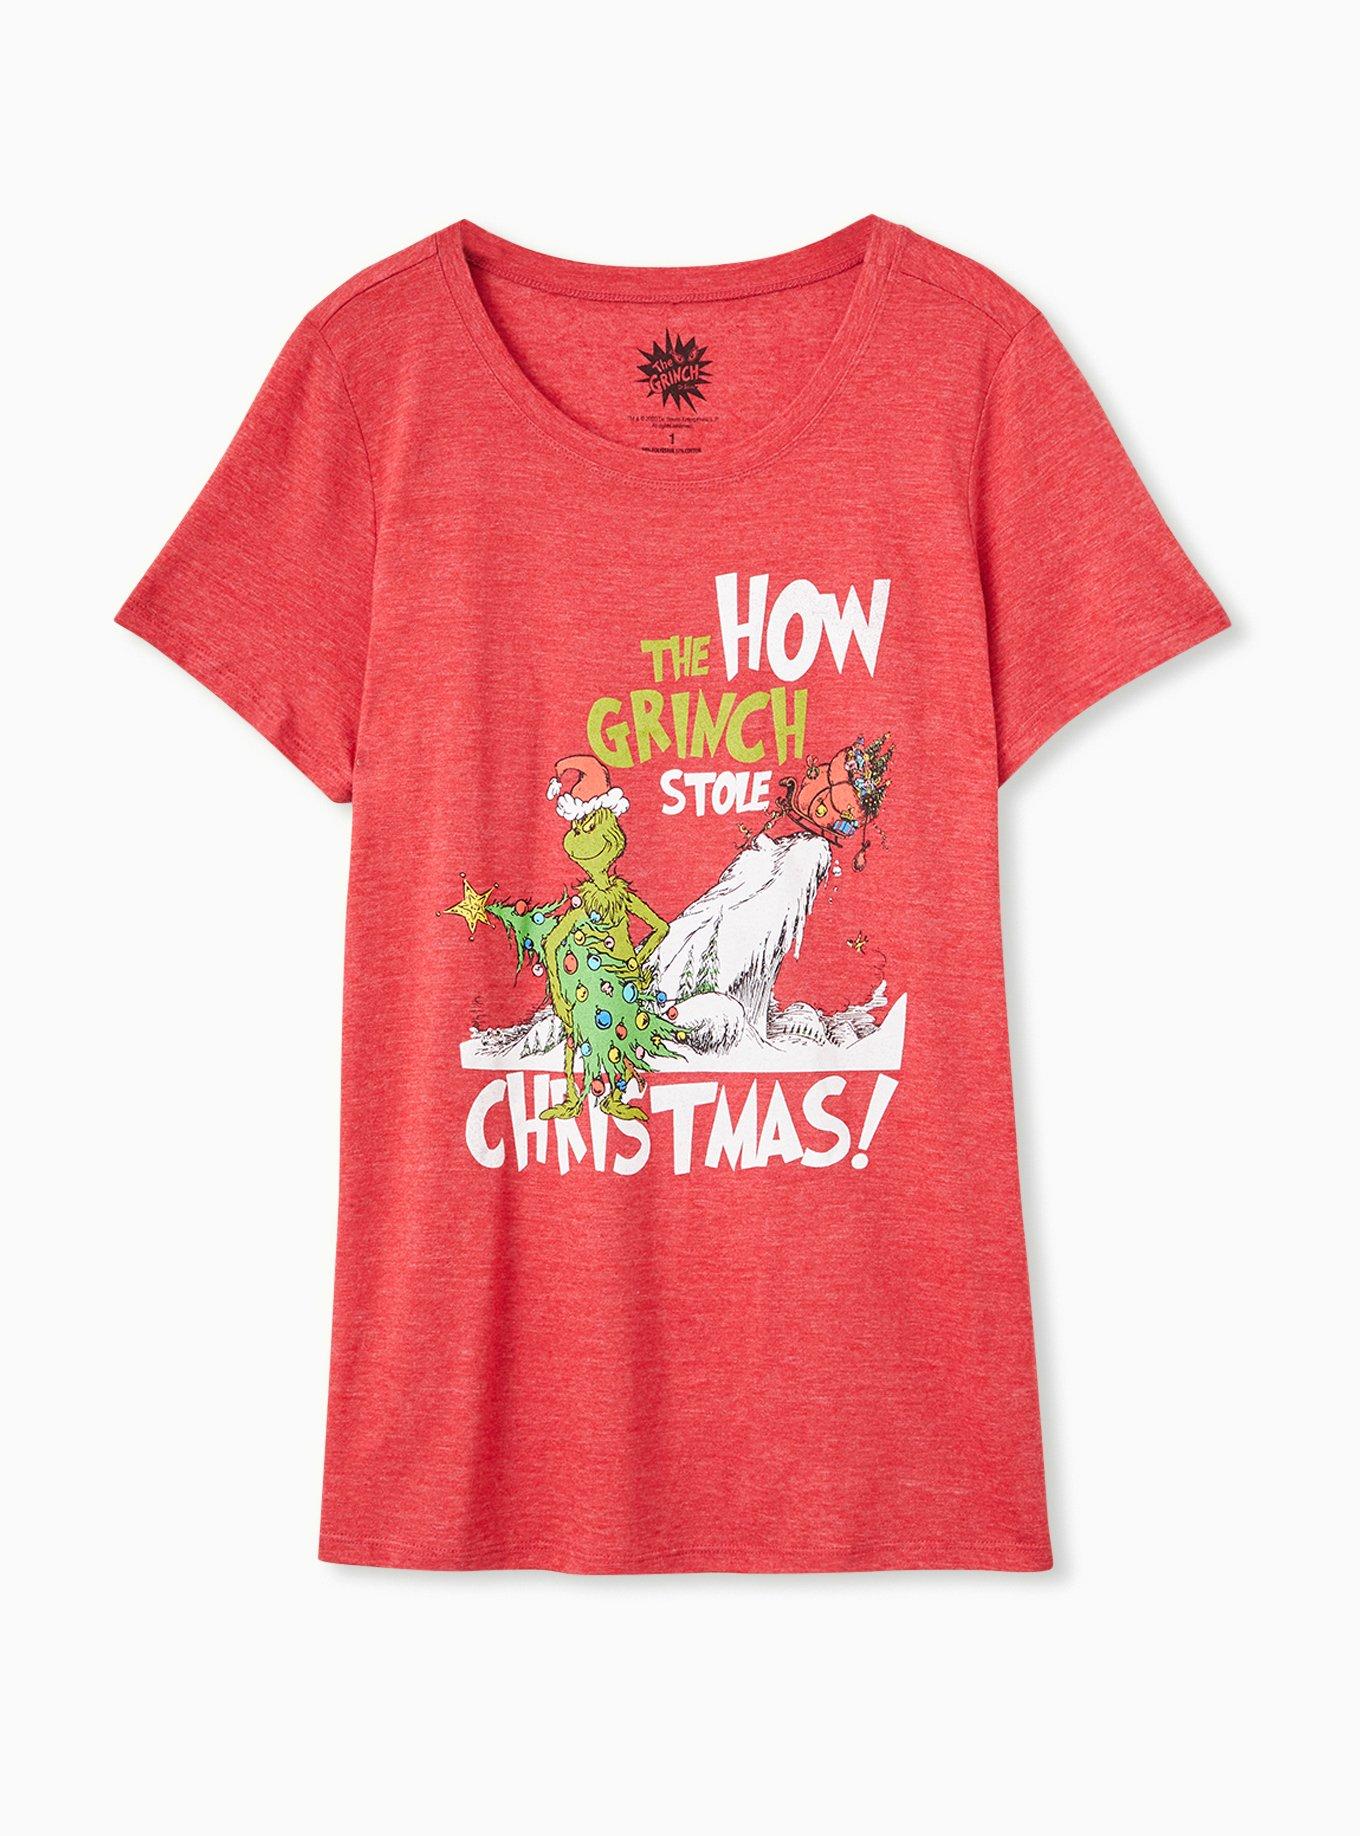 Plus Size - How - Tee - Red Grinch The Crew Stole Slim Fit Torrid Christmas